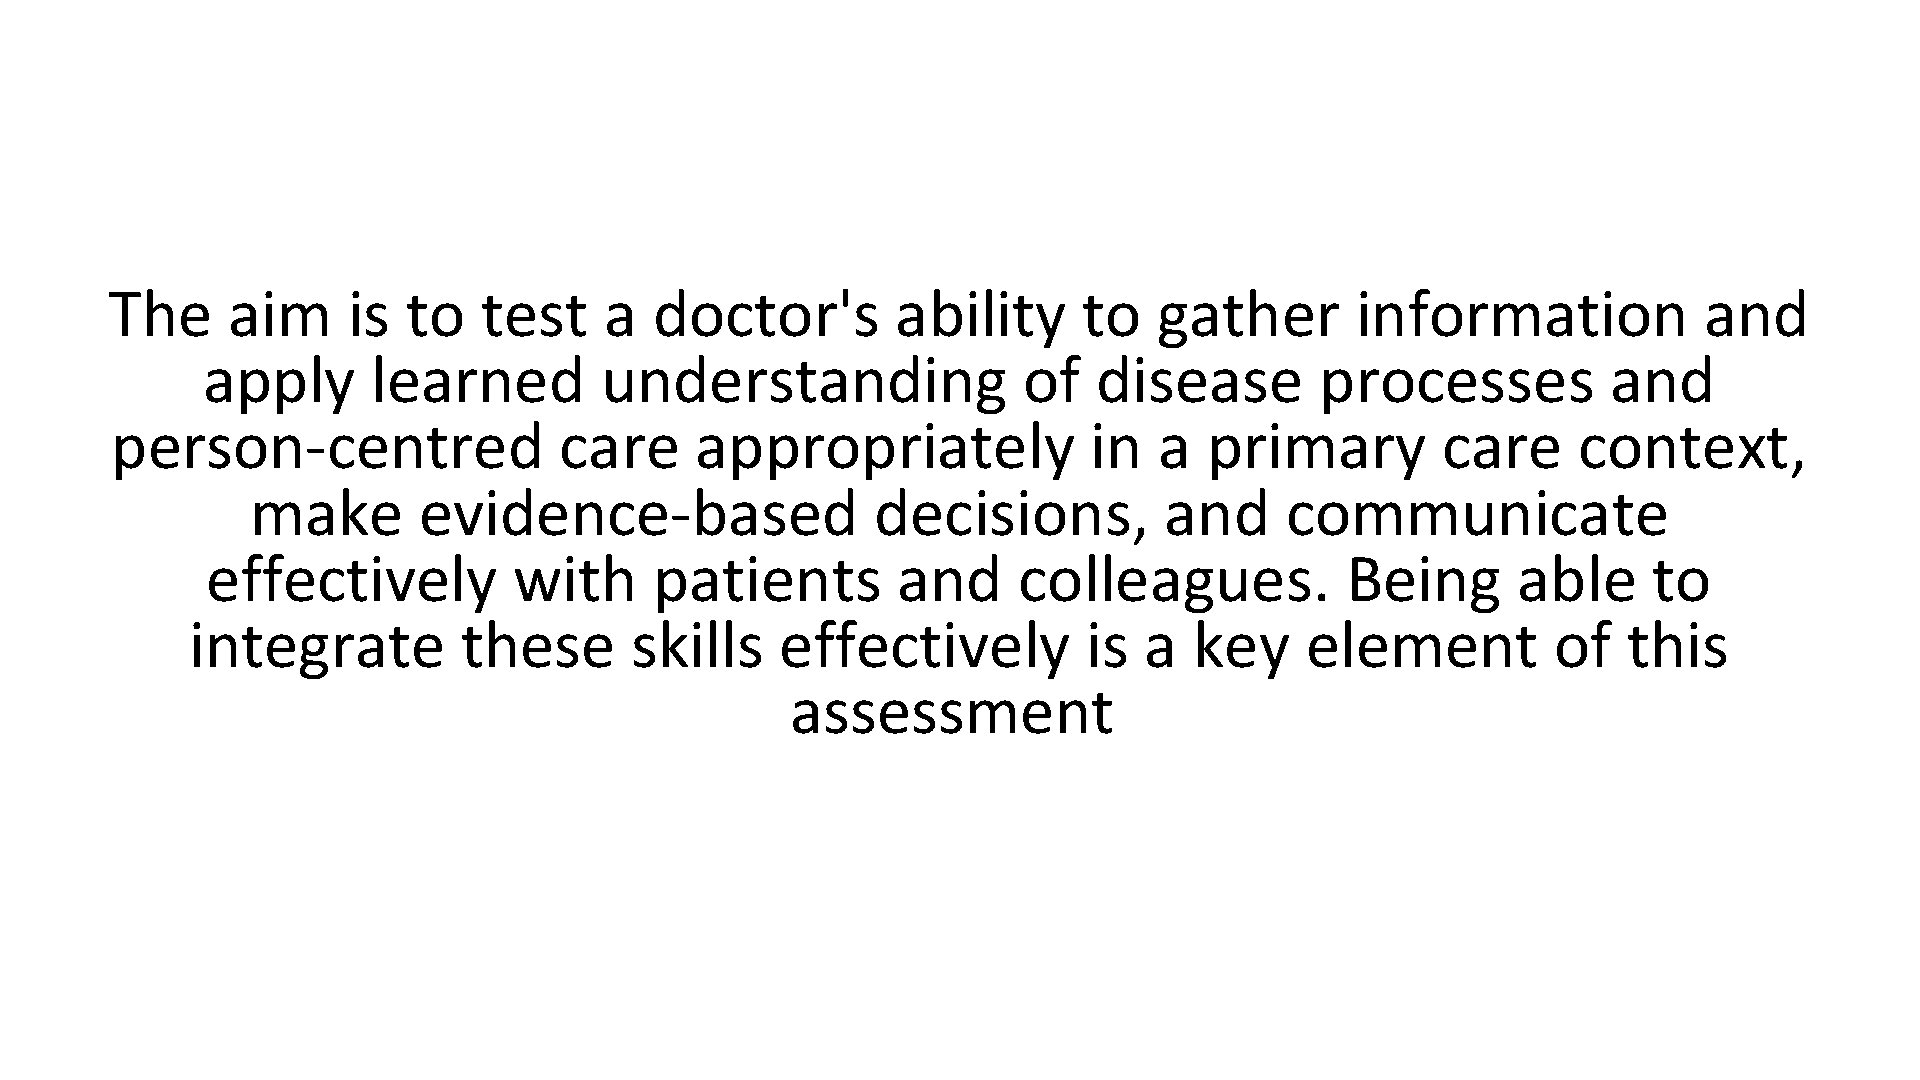 The aim is to test a doctor's ability to gather information and apply learned